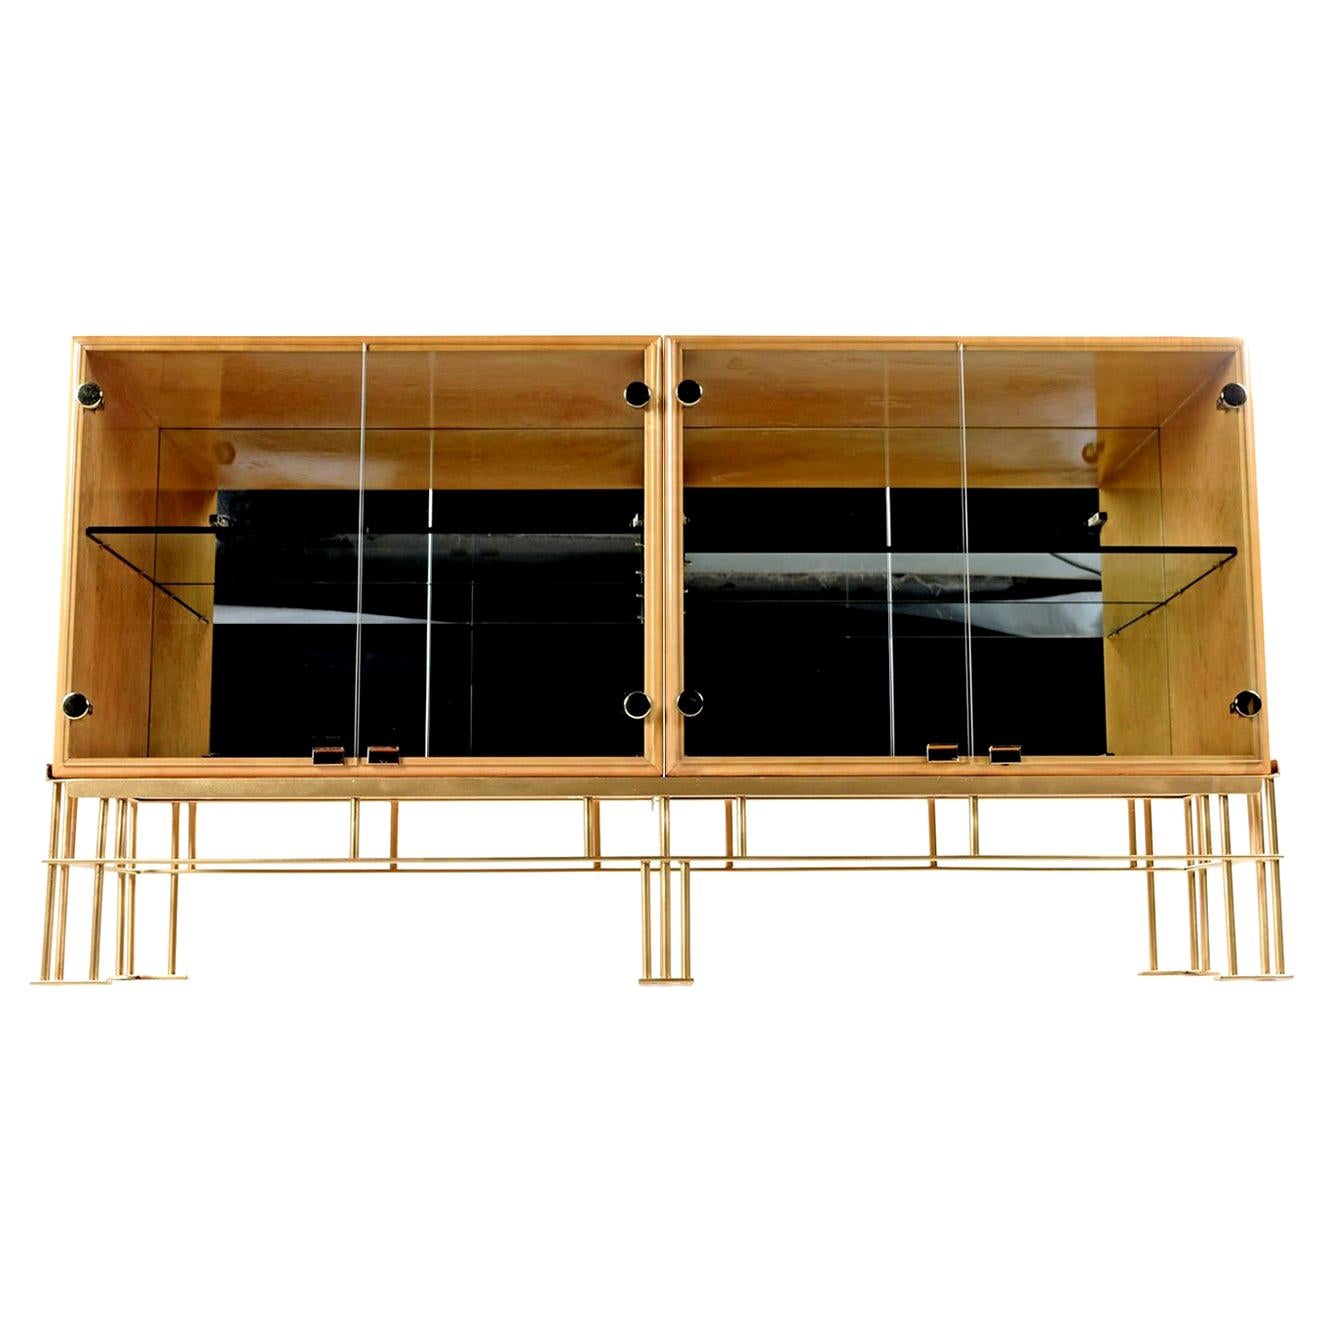 These iridescent lacquered solid bird's-eye maple wood cabinets with their polished brass accents are sure to make this piece the focal point of any room. The two glass door cabinets features a mirrored back and adjustable glass shelf, allowing it